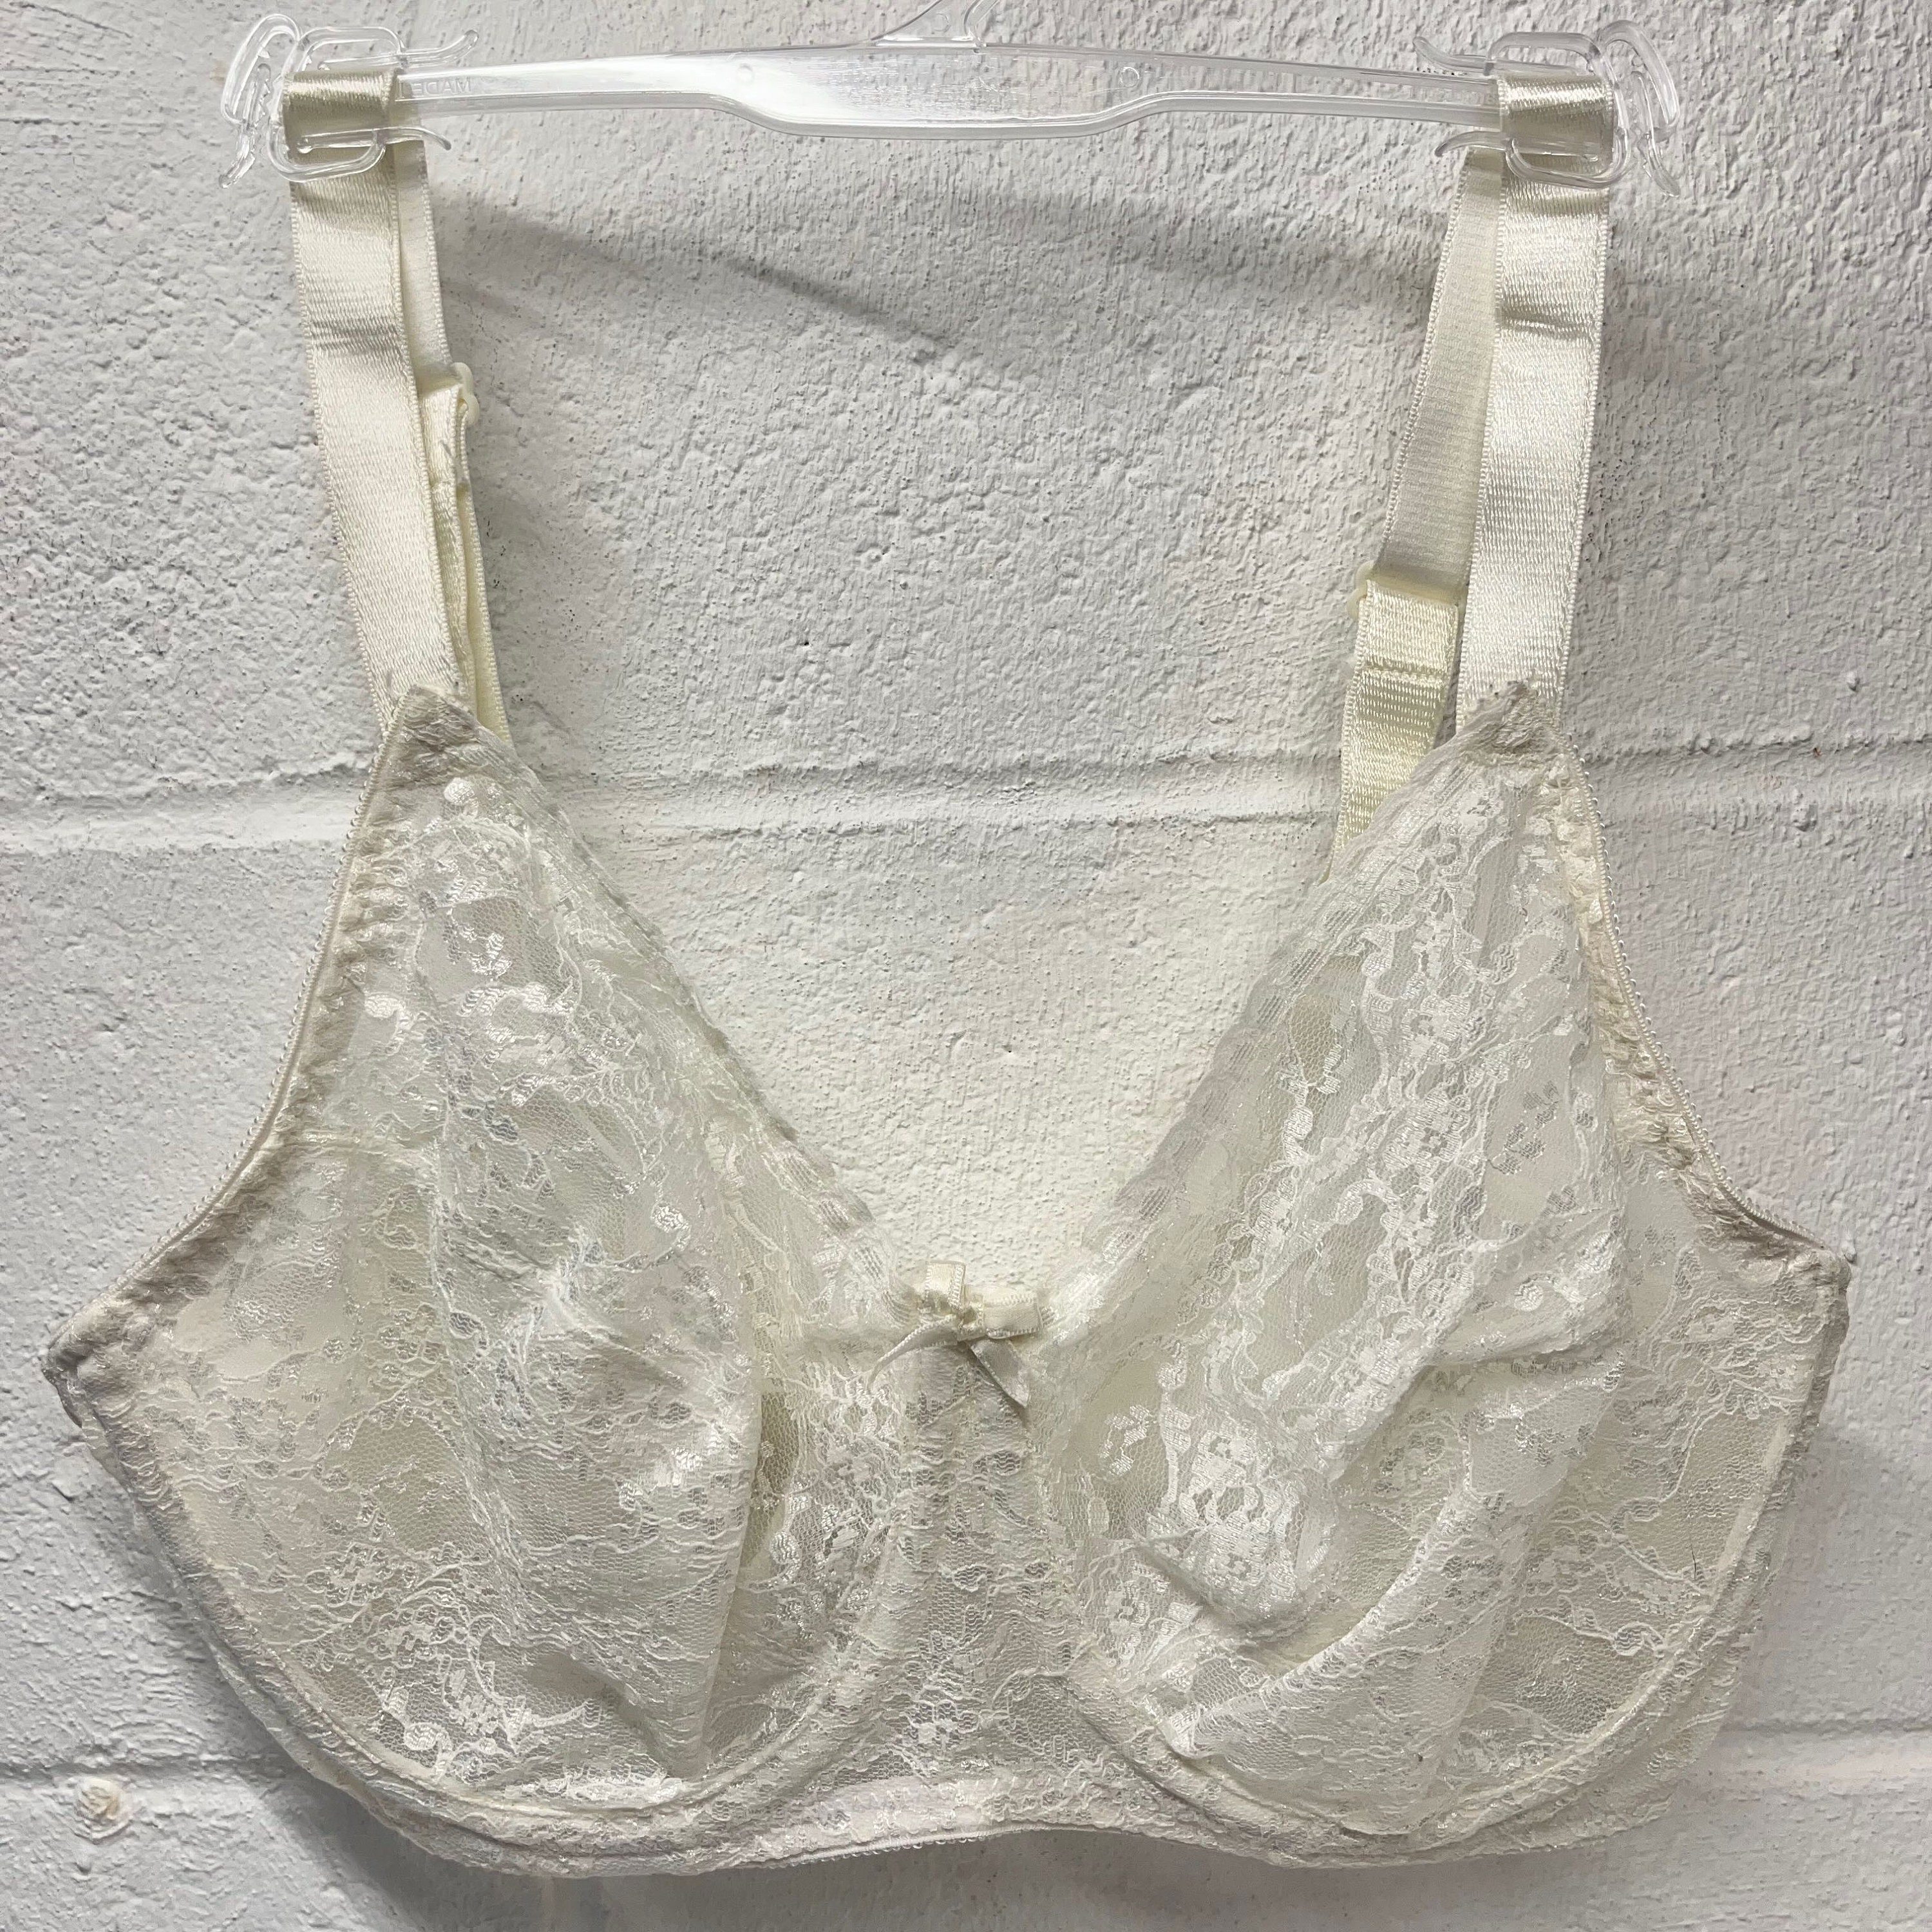 Buy Lace Bra 36dd Online In India -  India